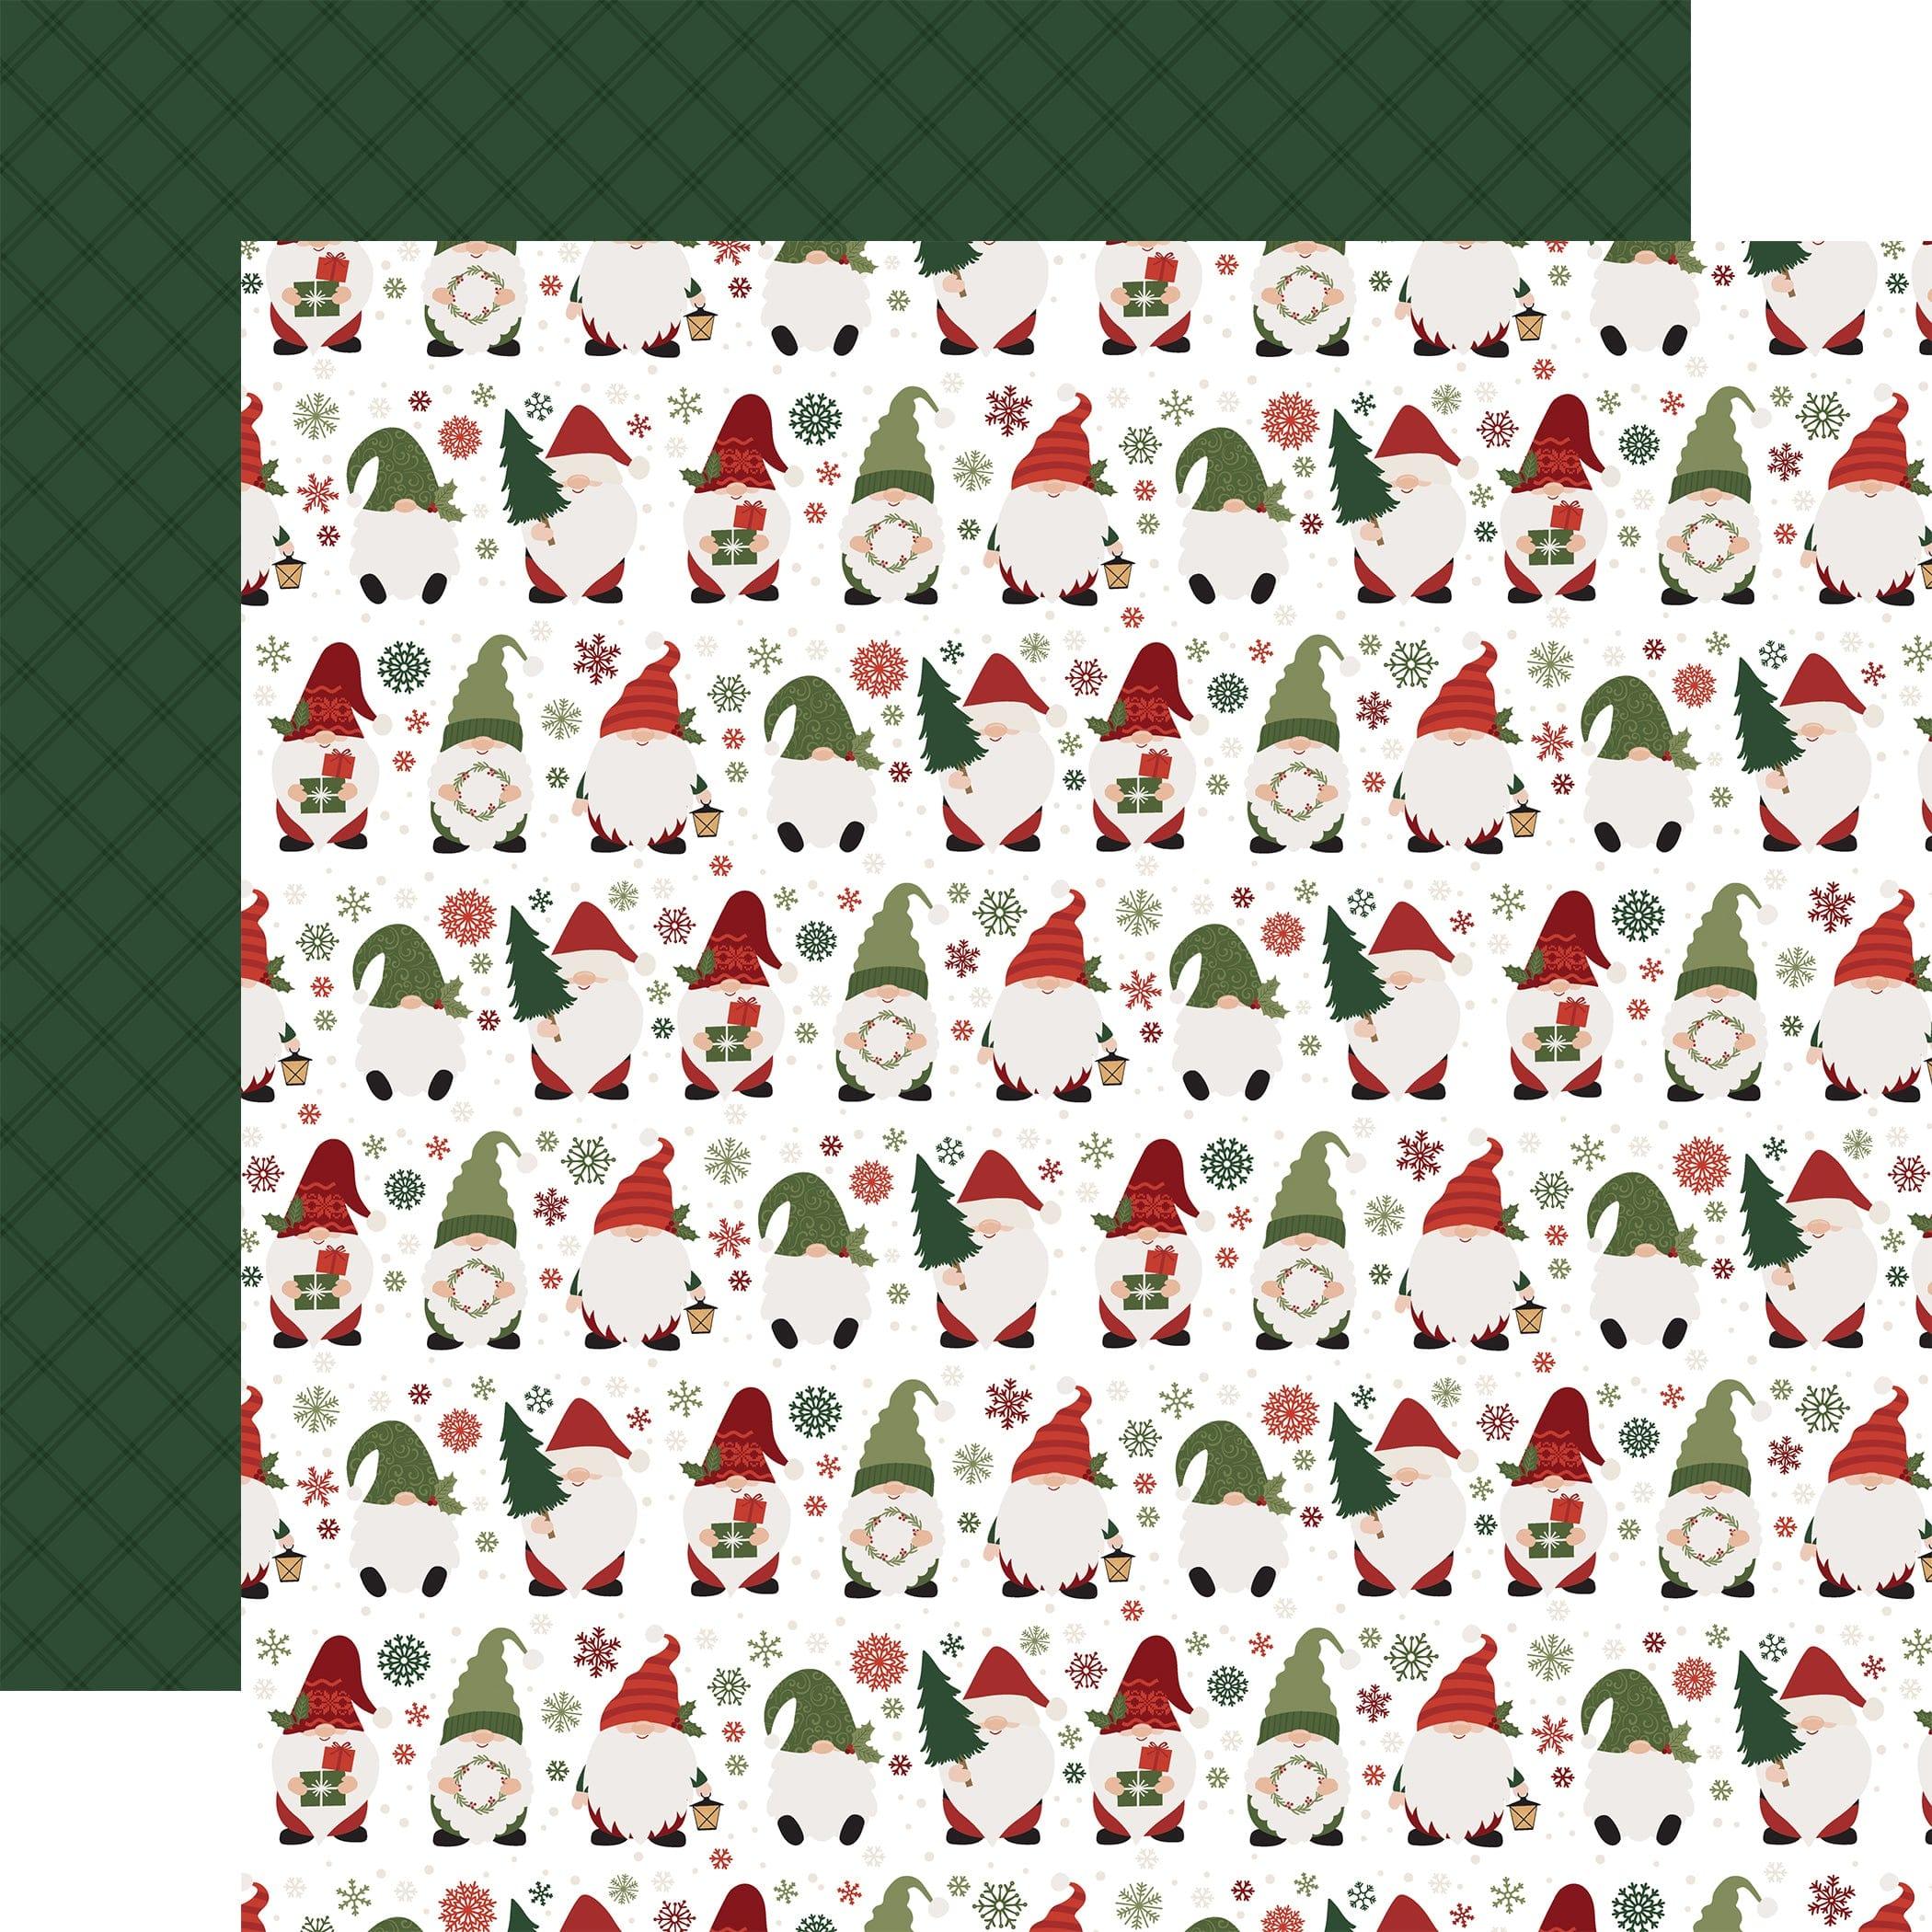 Gnome For Christmas Collection 12 x 12 Scrapbook Paper & Sticker Pack by Echo Park Paper - Scrapbook Supply Companies